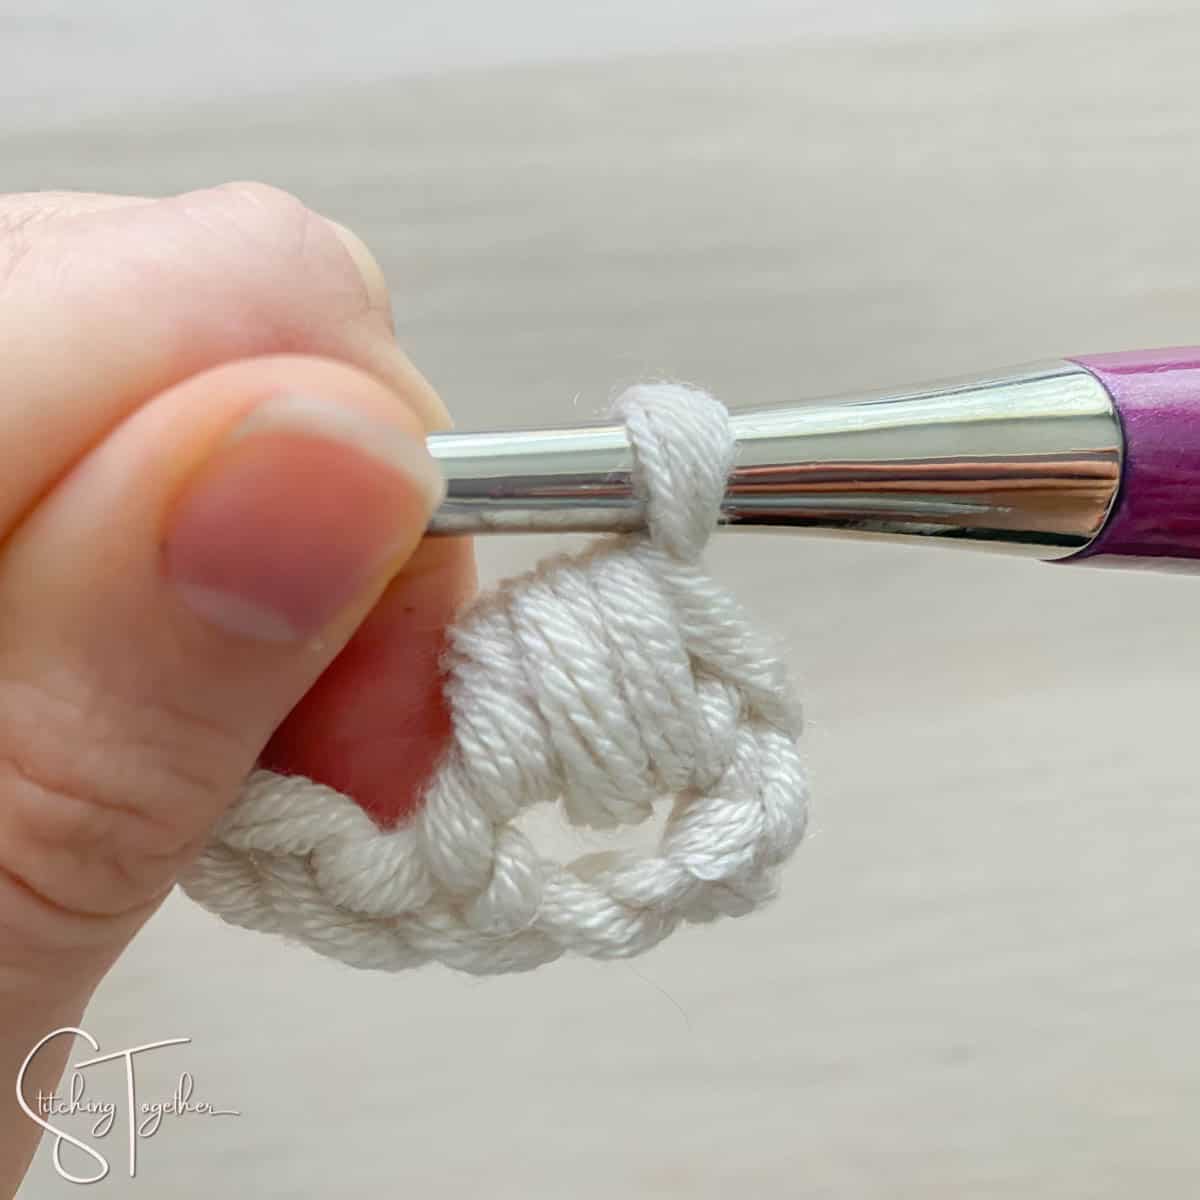 yarn over and pull through all 6 loops on the hook